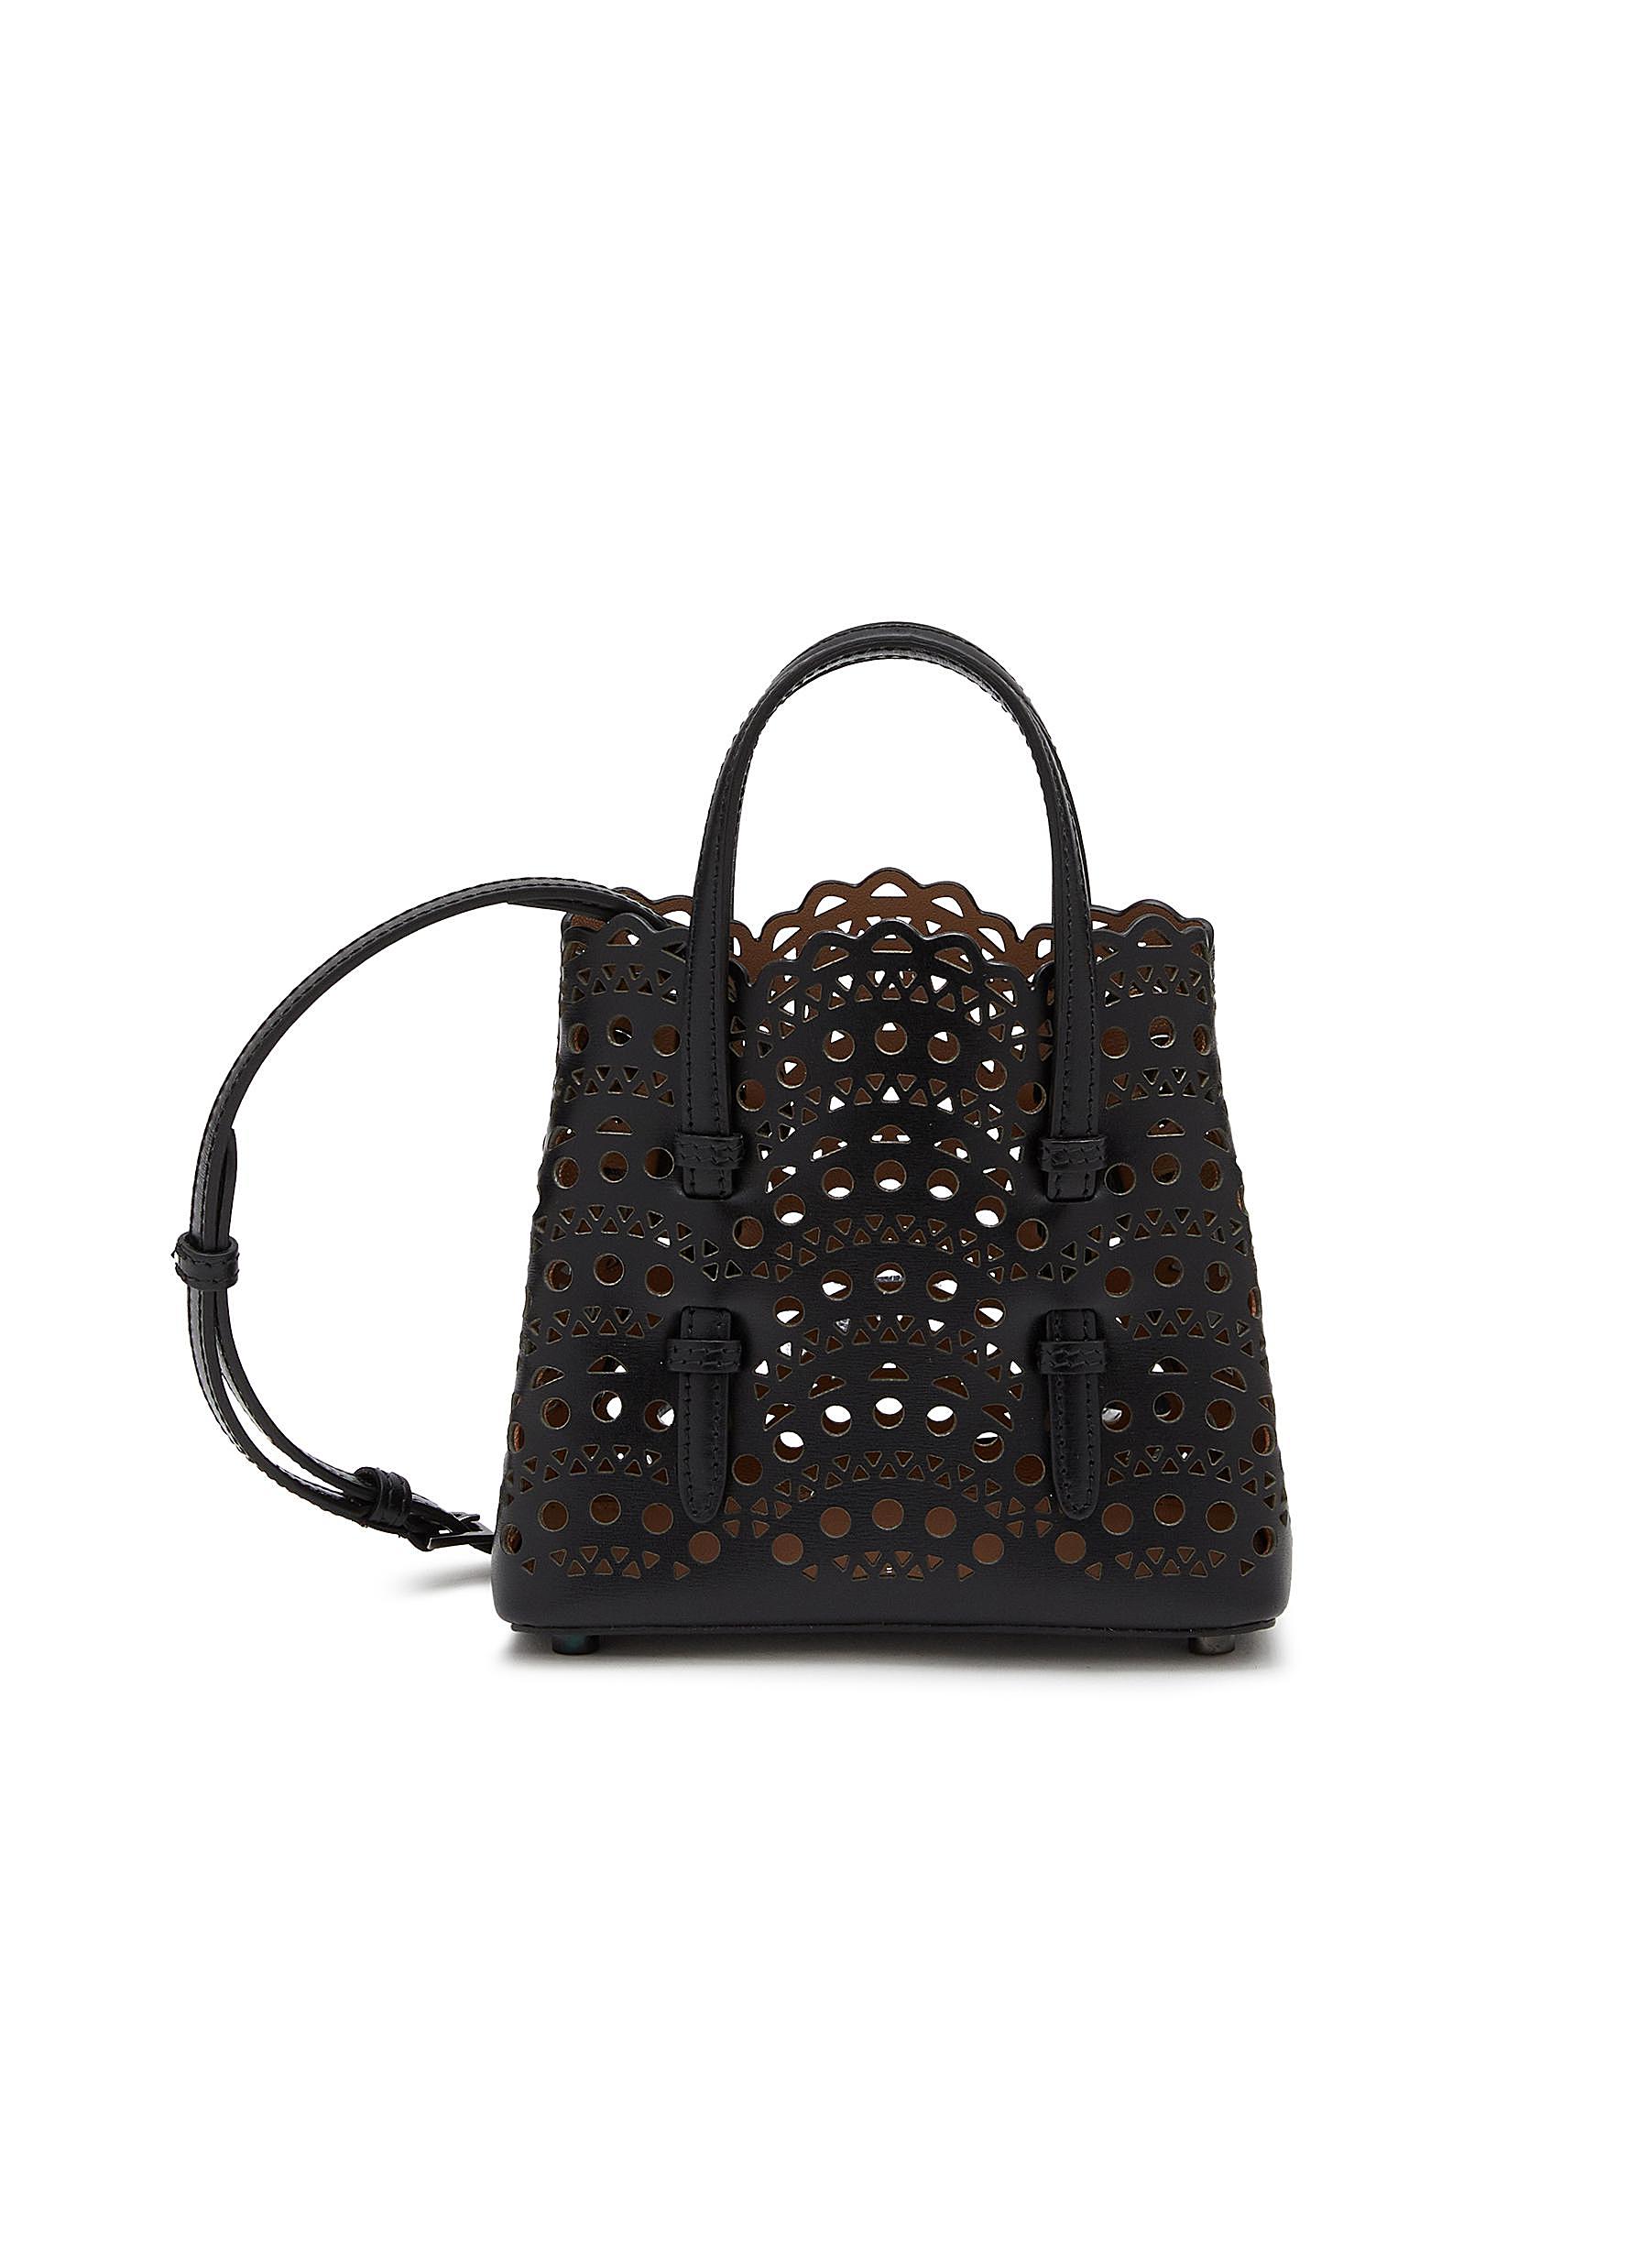 Mina Small Perforated Leather Tote Bag in Black - Alaia | Mytheresa